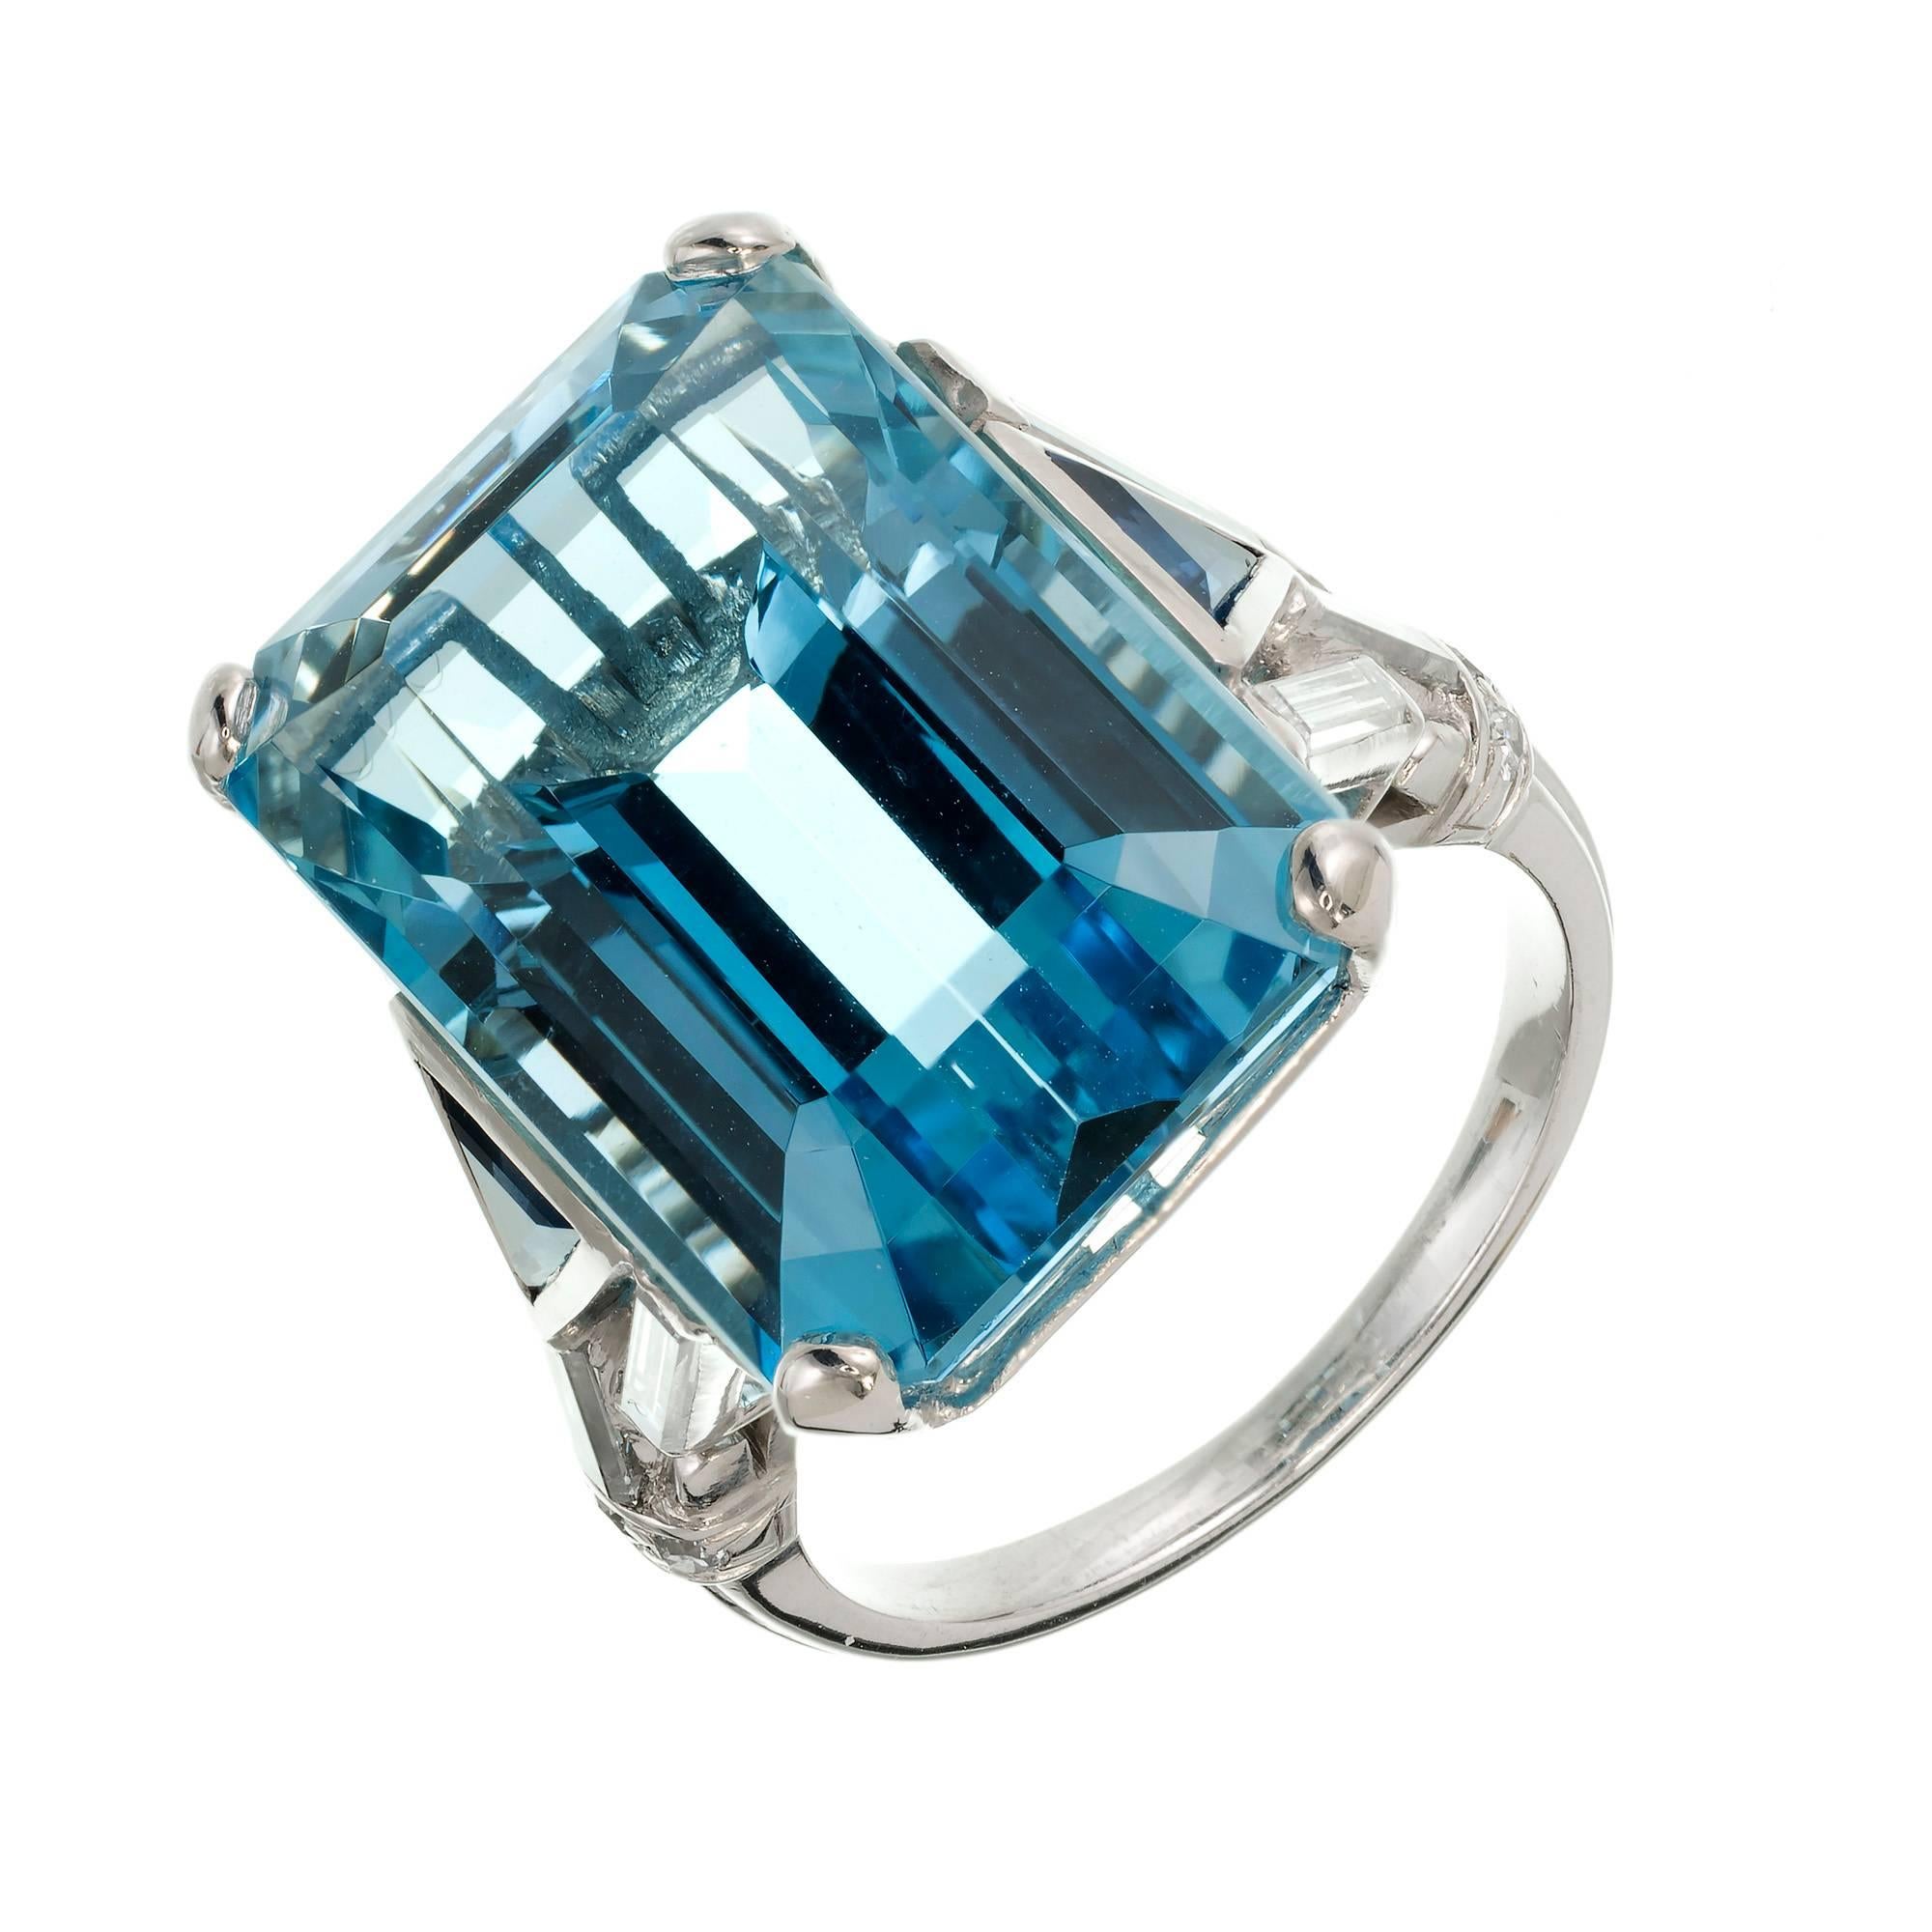 1950s aqua diamond and sapphire cocktail ring. Natural bright blue Aqua 18.87cts with triangle Sapphires and long straight baguette Diamond accents in a solid Platinum setting.

1 Emerald cut gem blue Aquamarine, approx. total weight 18.87cts, VS
2